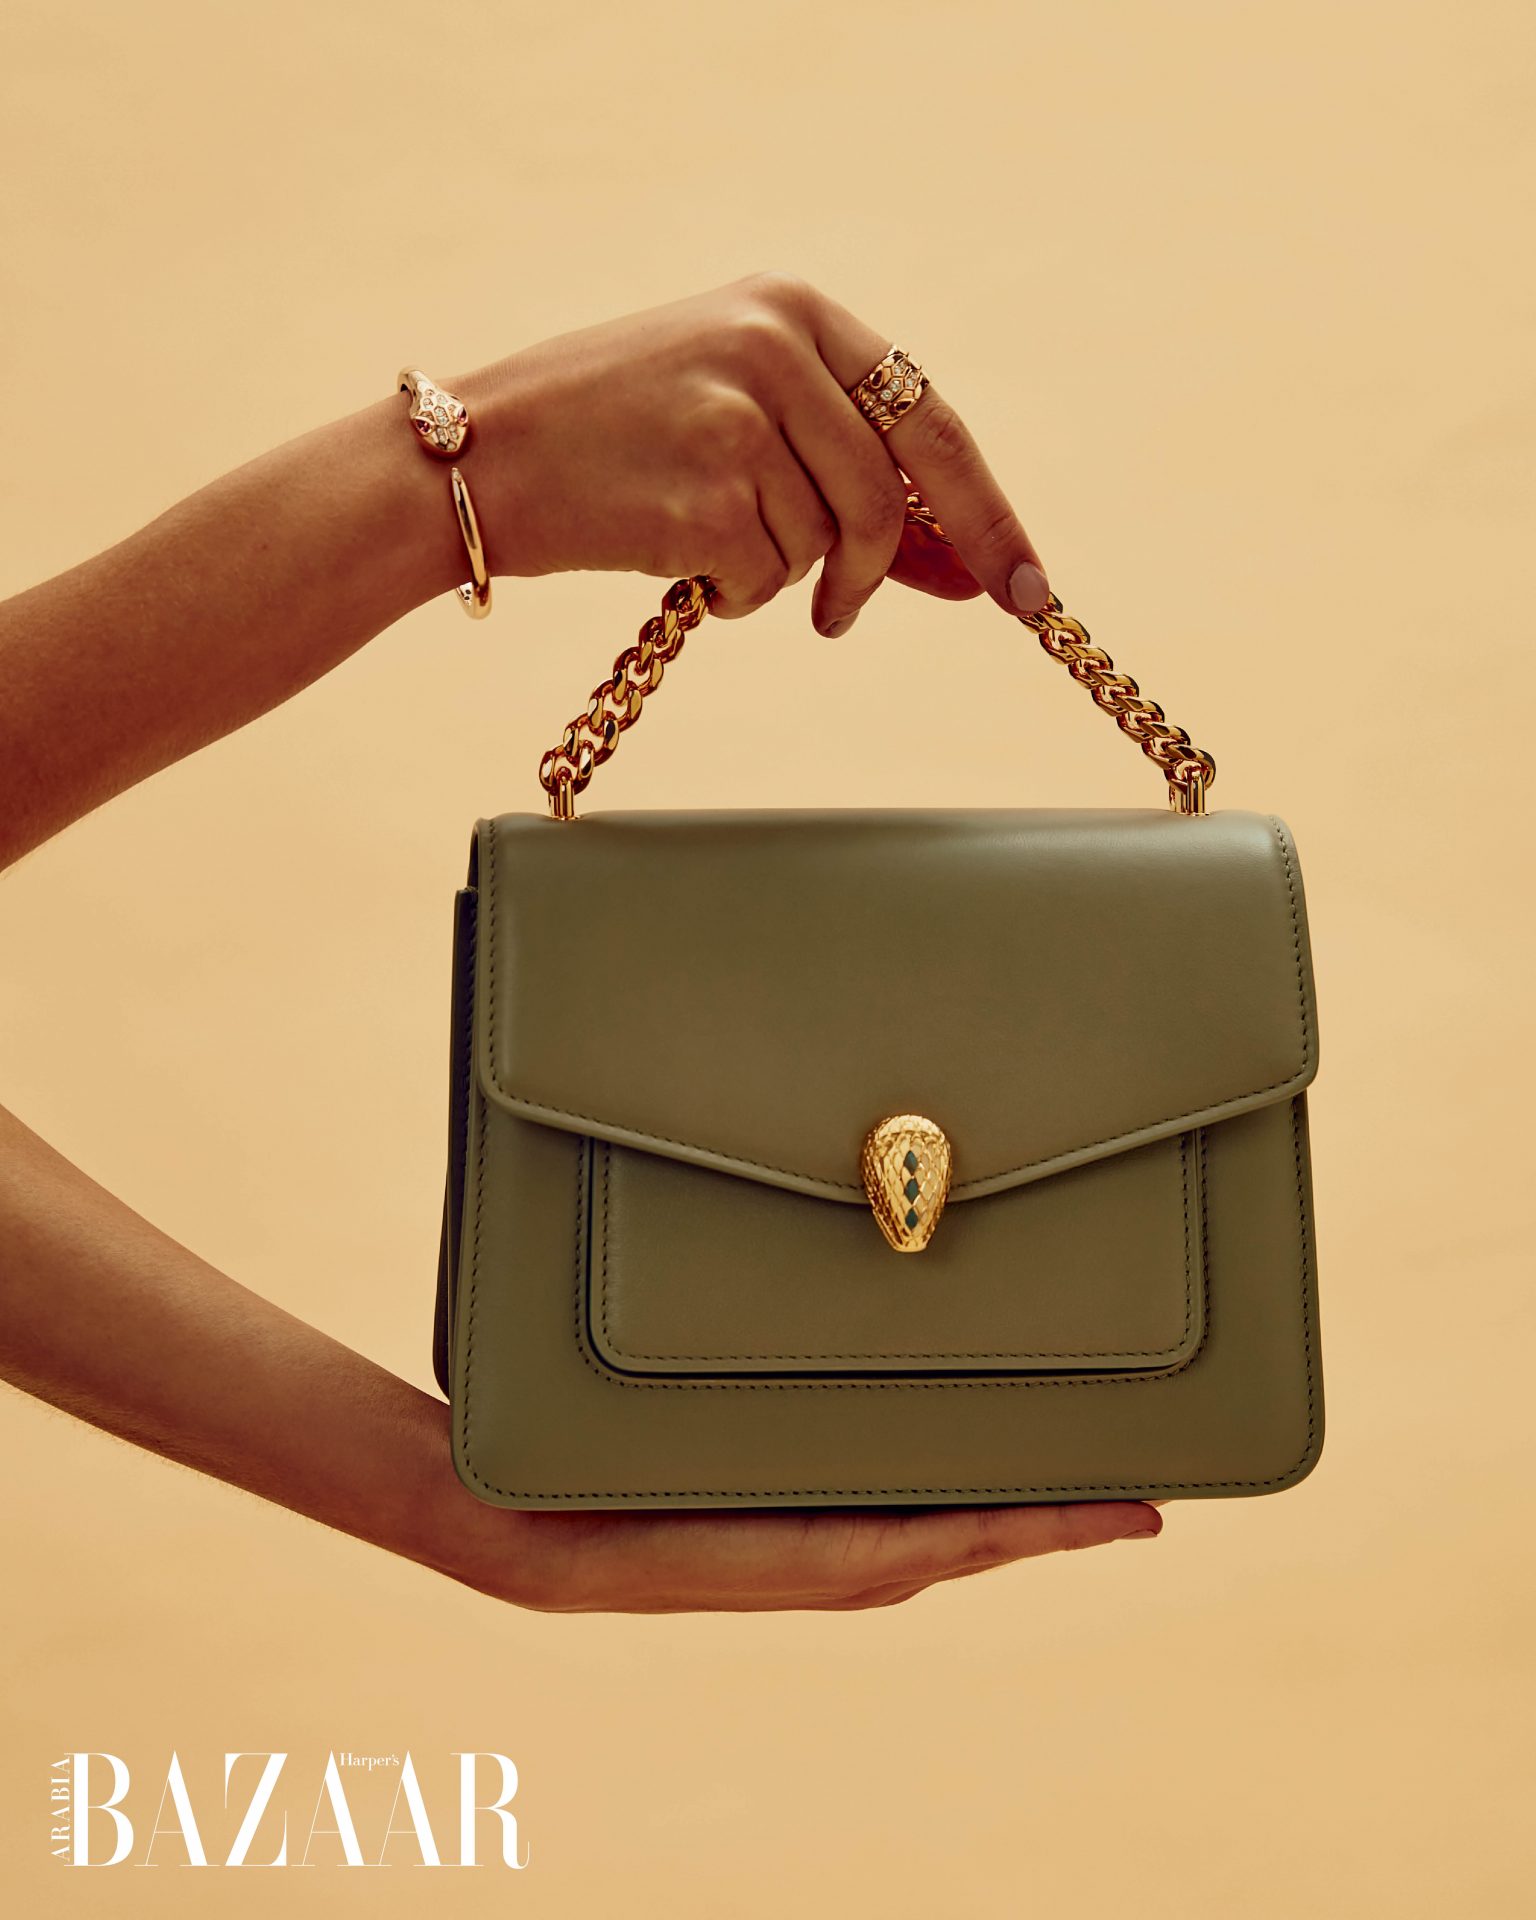 It's In The Bag: Bvlgari's Latest Launch Is A Must-Have This